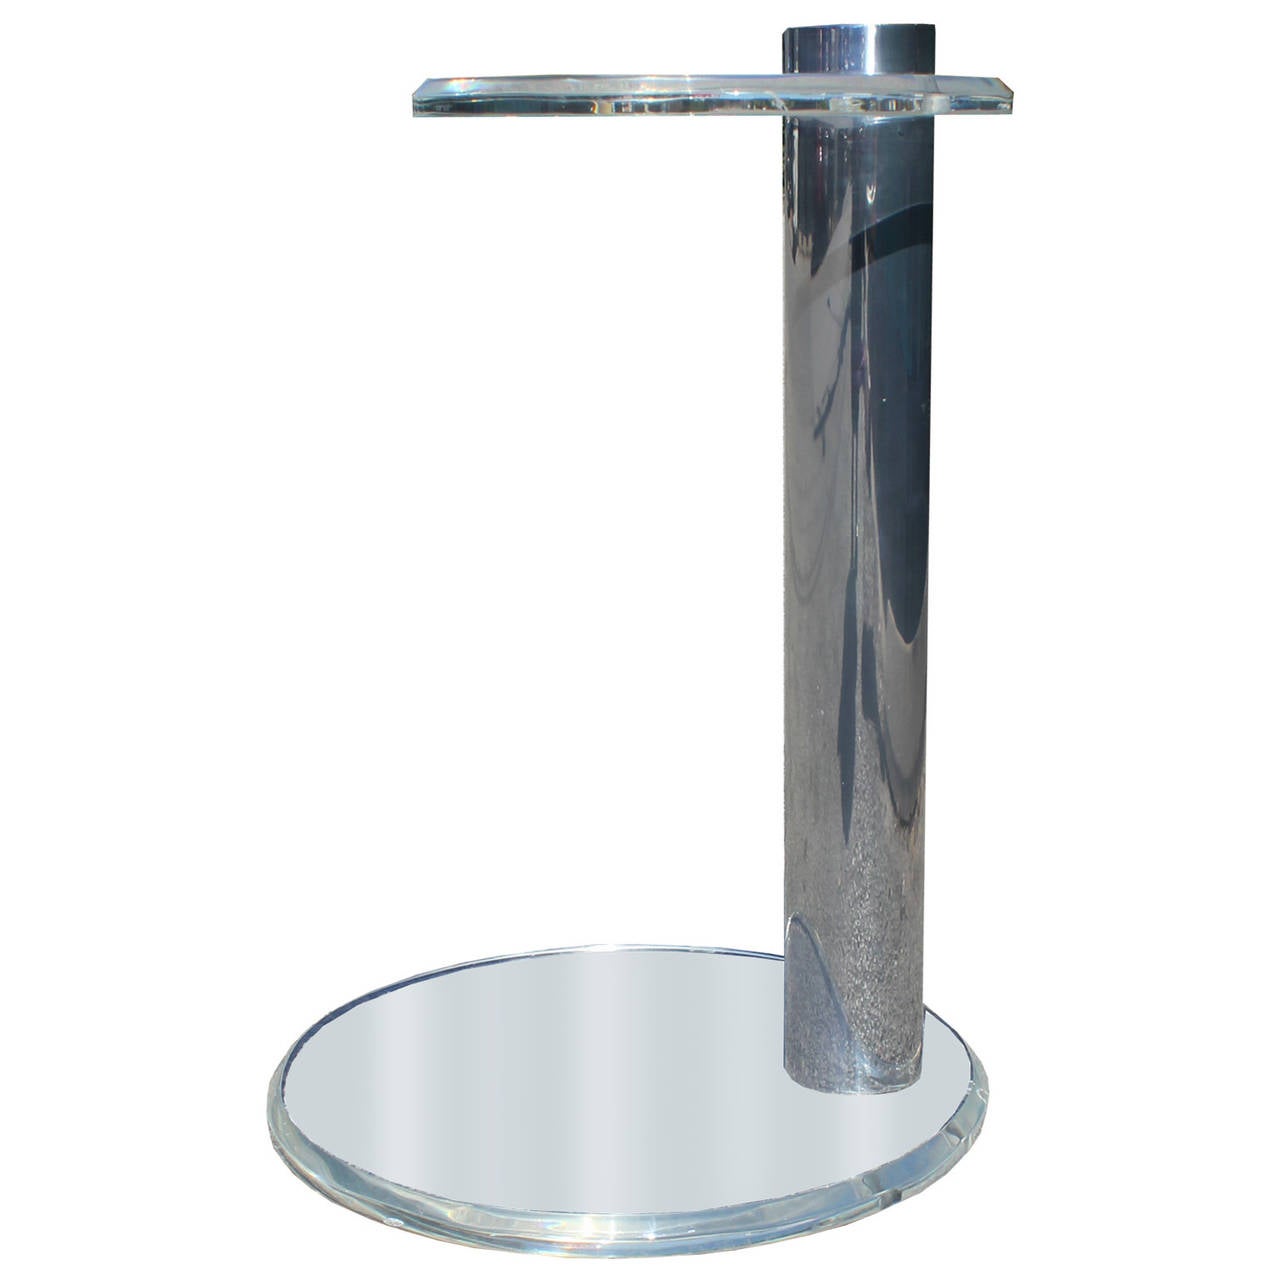 Clear lucite and reflective chrome make this piece blend seamlessly into any space.